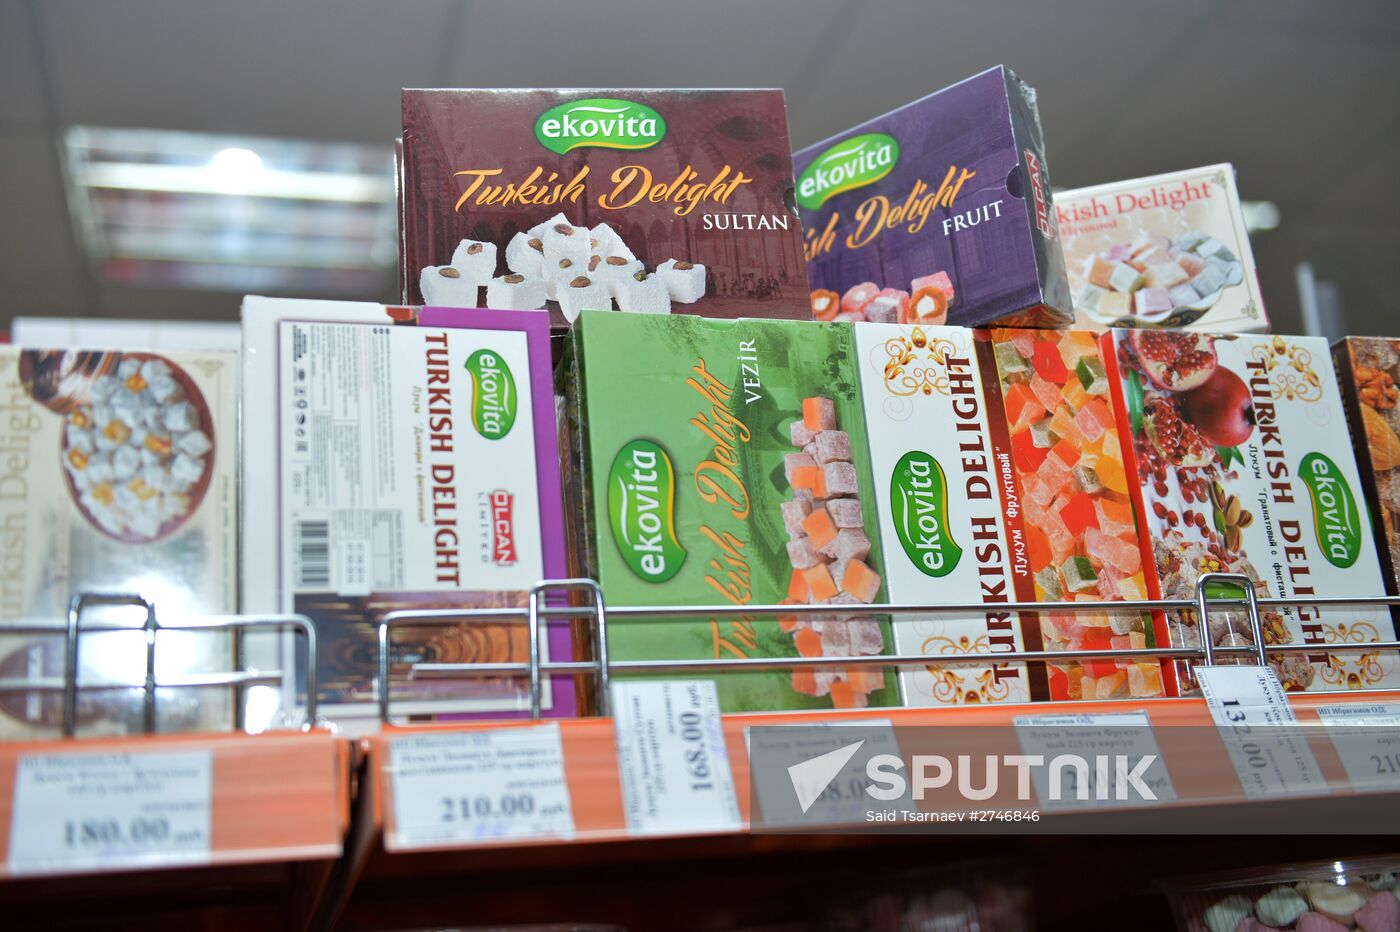 Foods from Turkey sold in Grozny